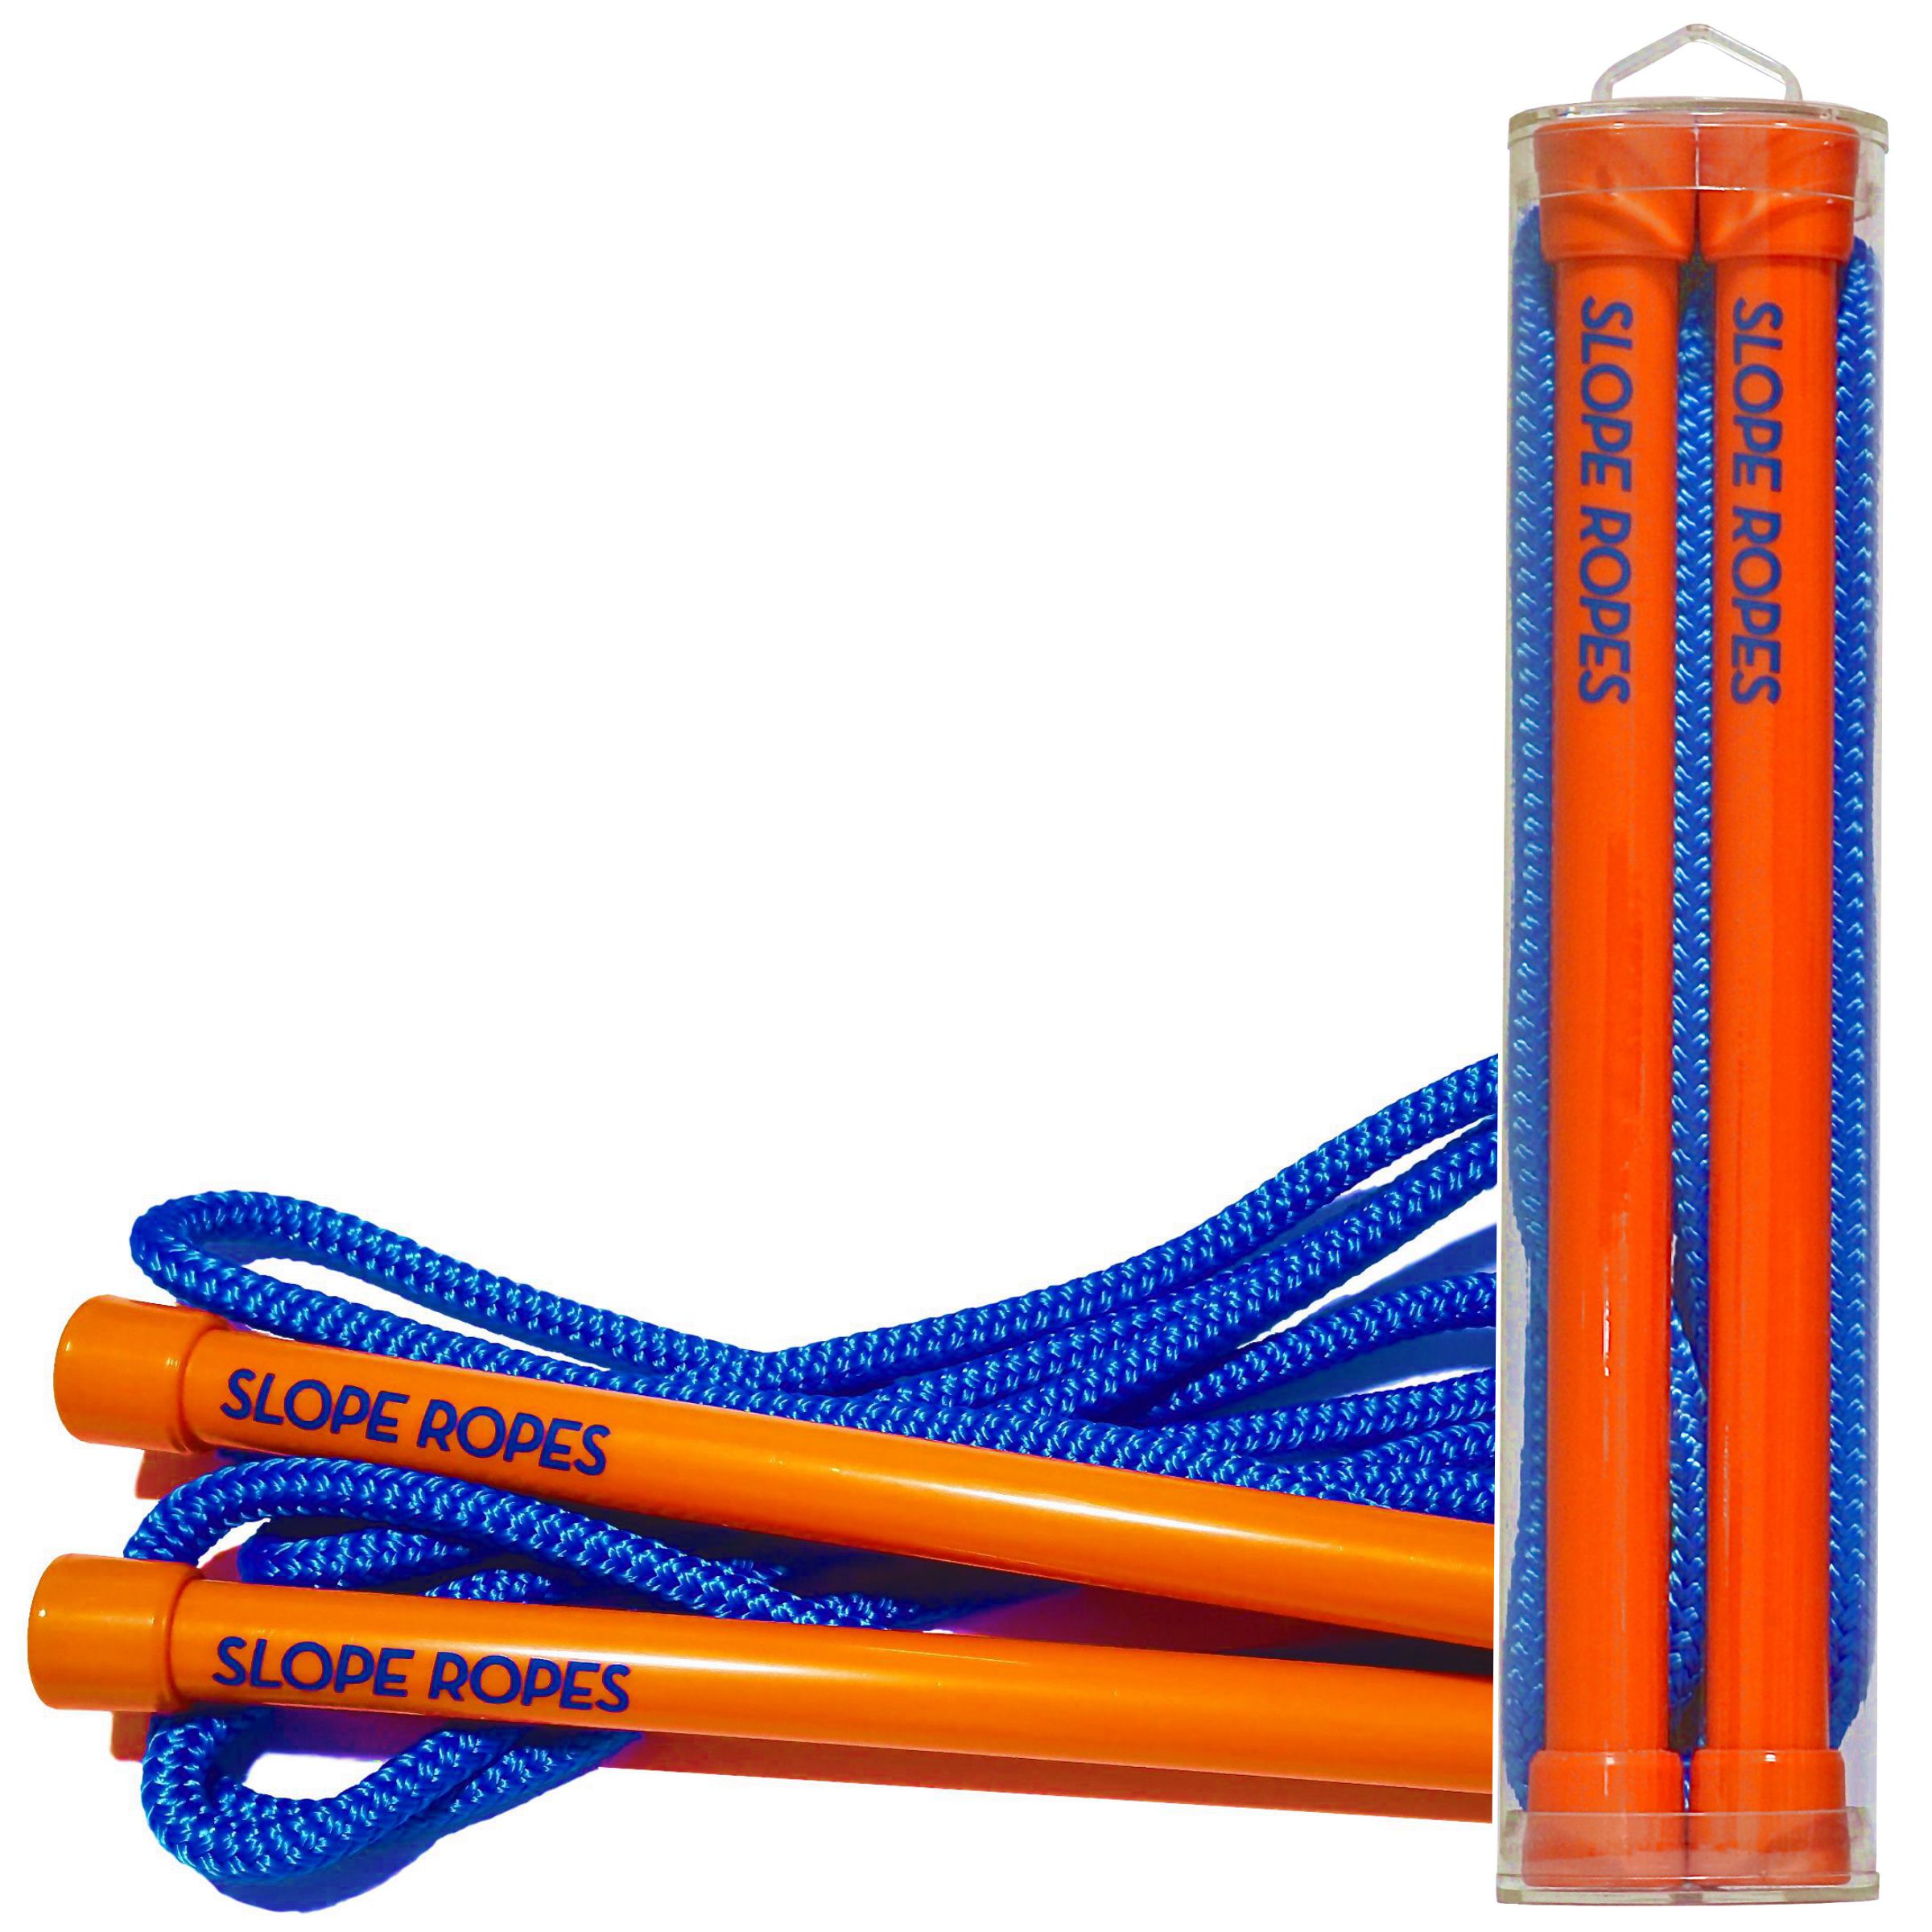 slope ropes (product).jpg